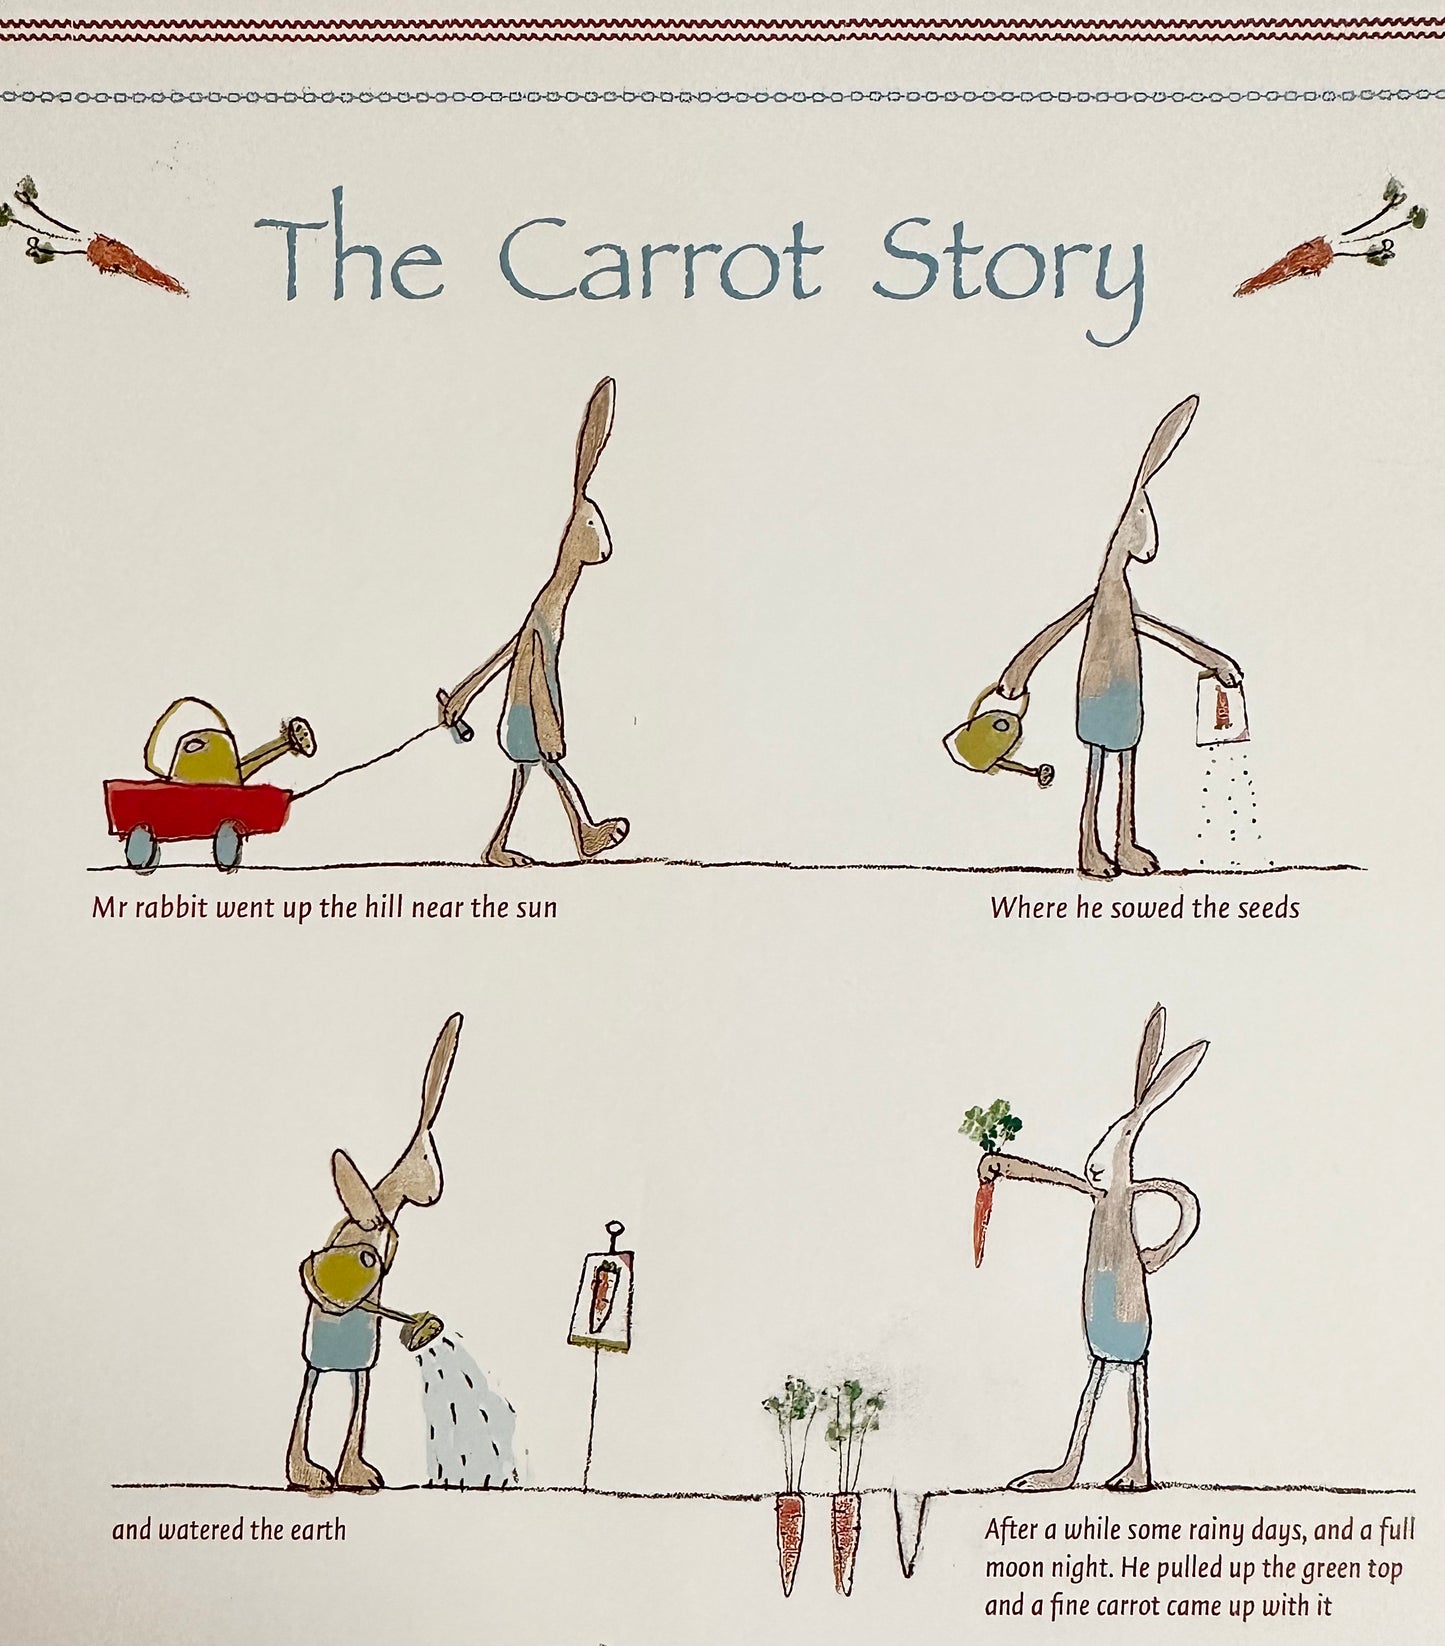 Poster: "The Carrot Story" - 2009